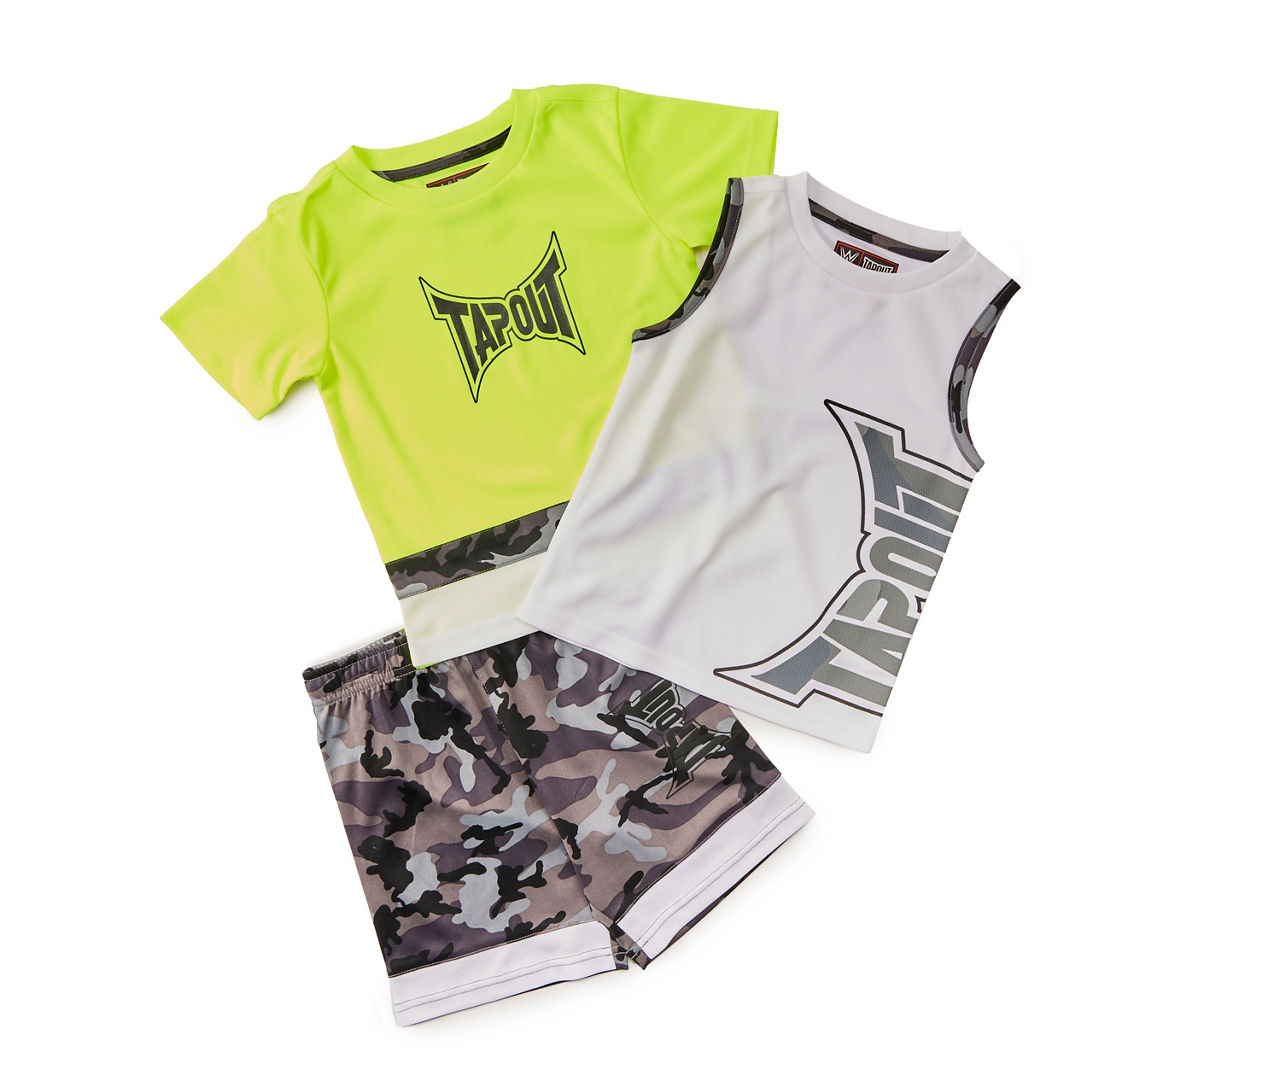 Kids' Size 8 Tapout Neon Yellow & Gray Logo Camo 3-Piece Tee Outfit